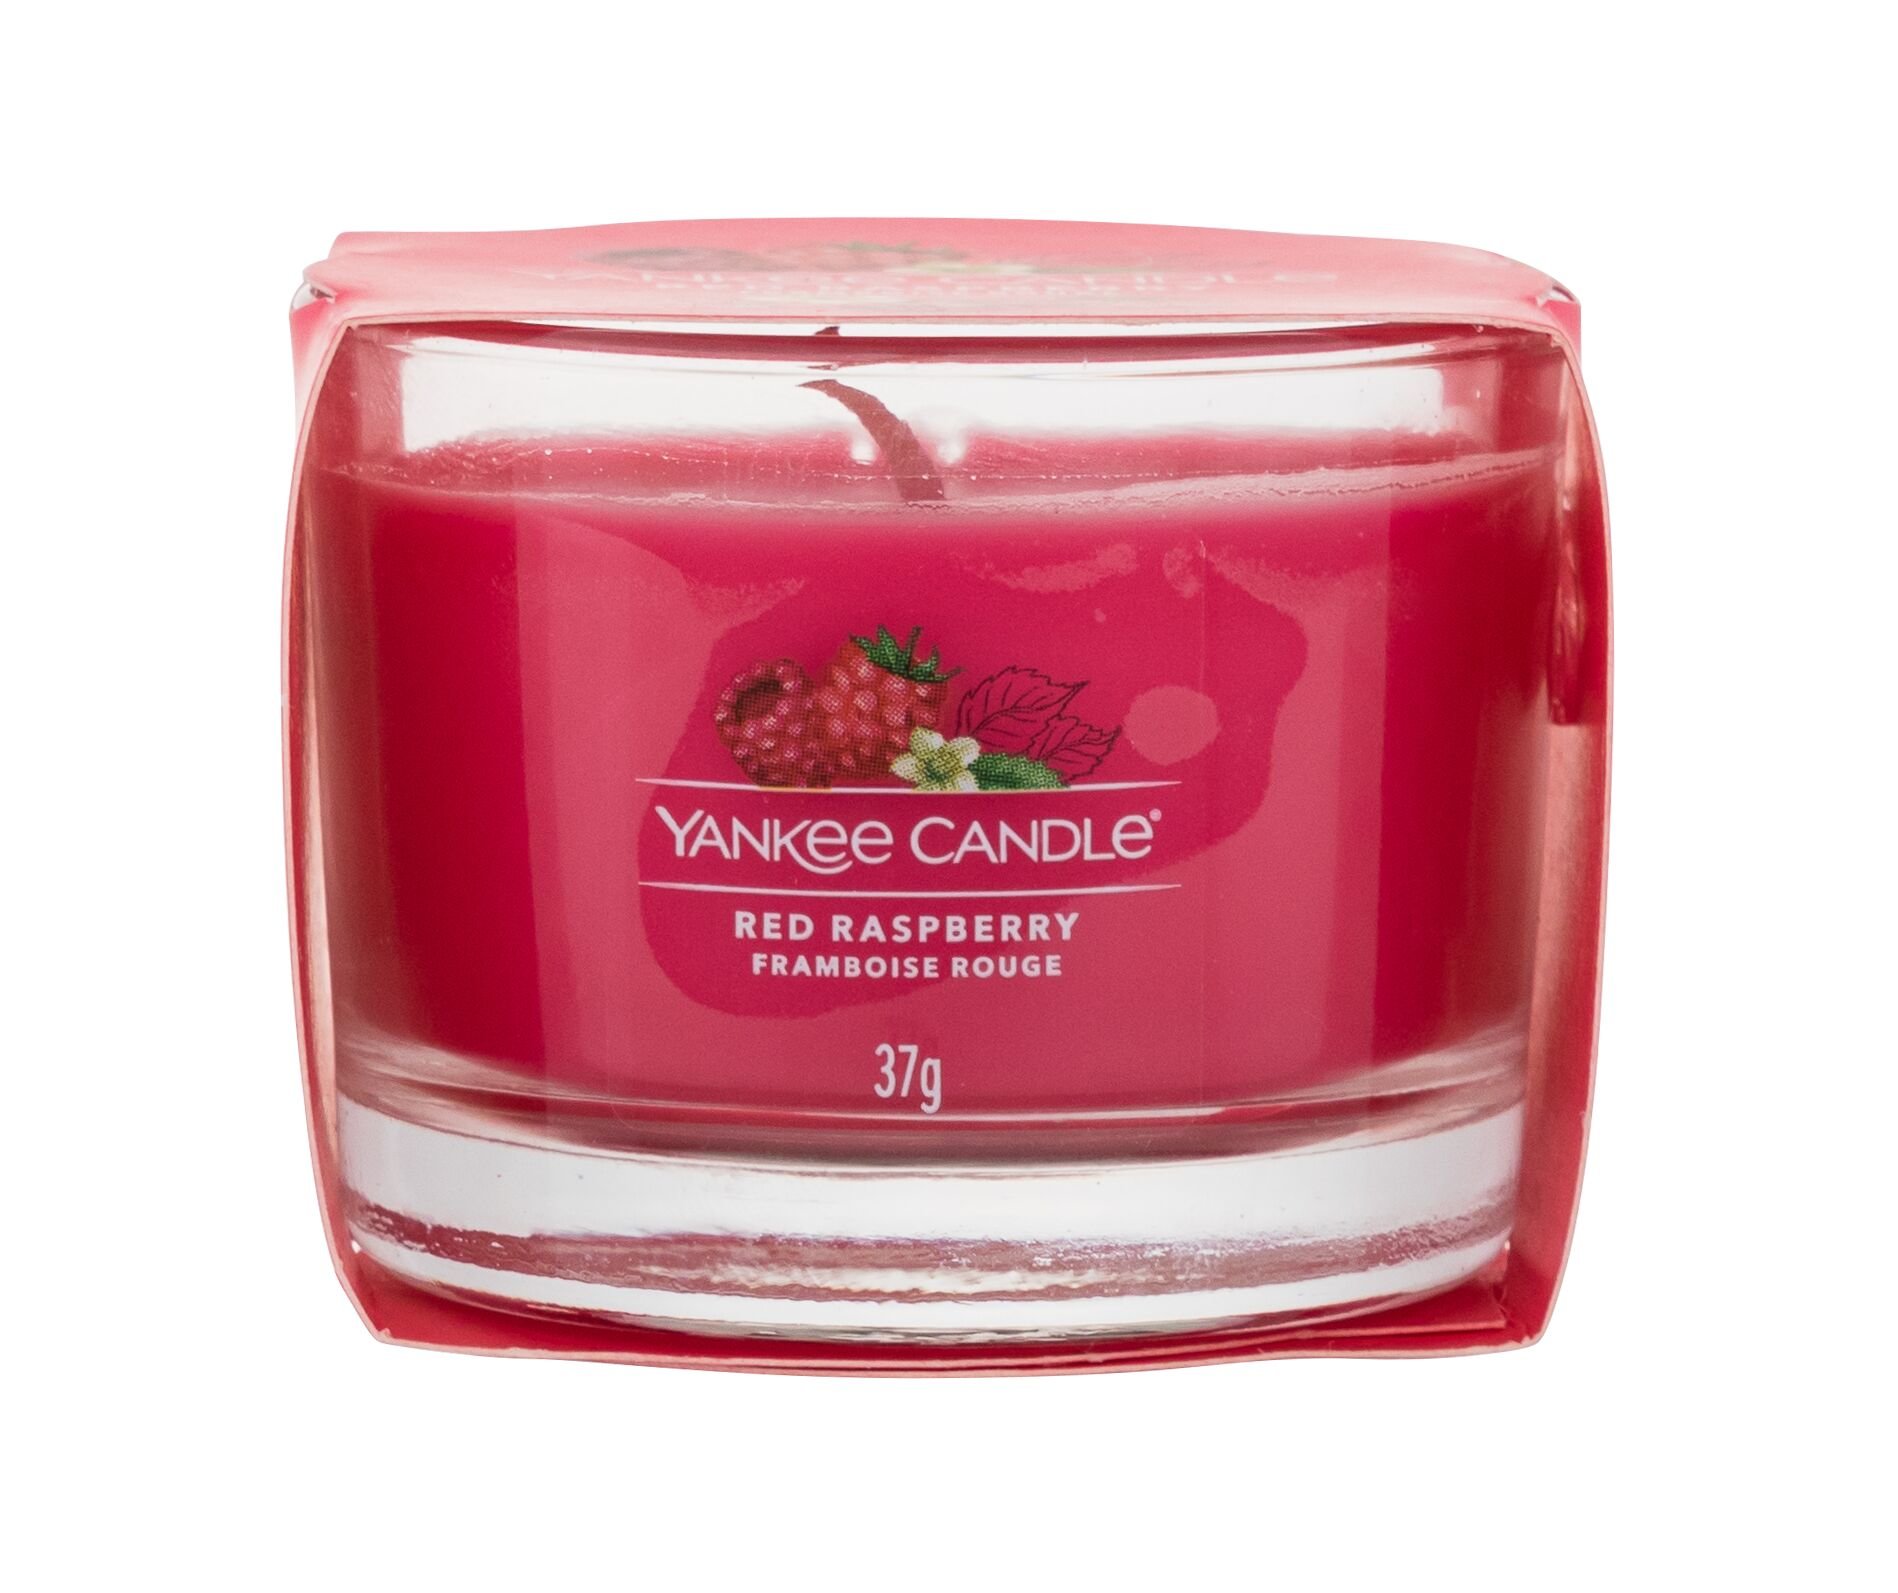 Yankee Candle Red Raspberry 37g Kvepalai Unisex Scented Candle